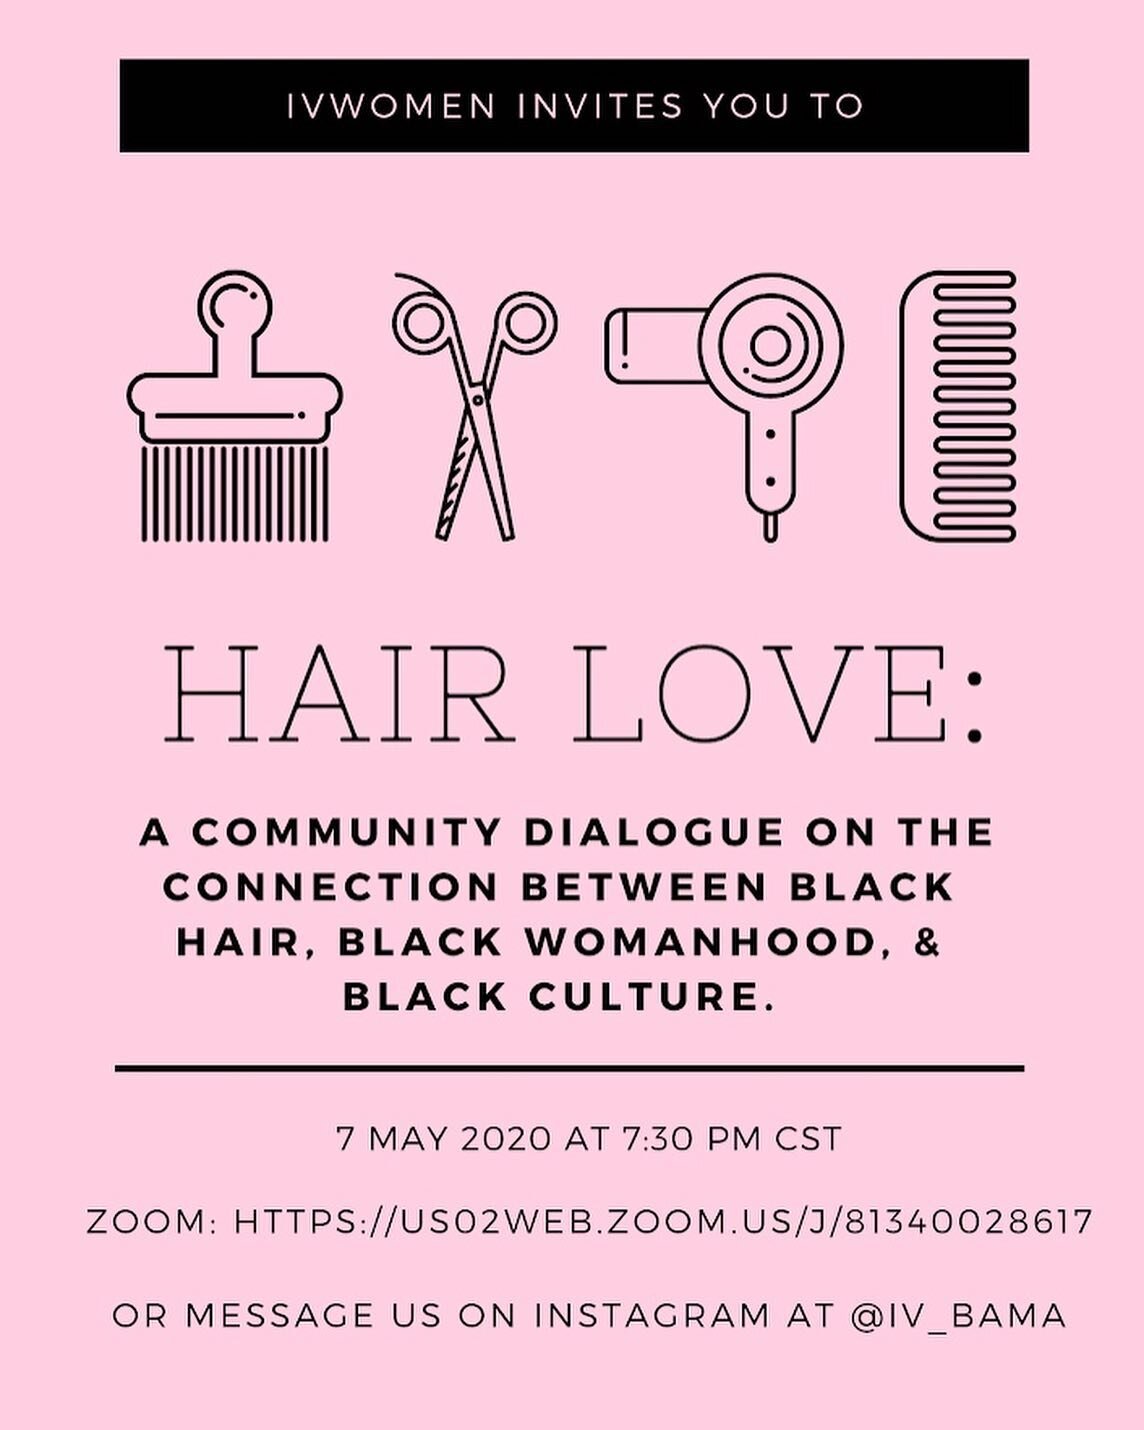 Join IVWomen tonight for a community conversation on the connection between Black hair, Black womanhood, &amp; Black culture. #WhatsYourStory